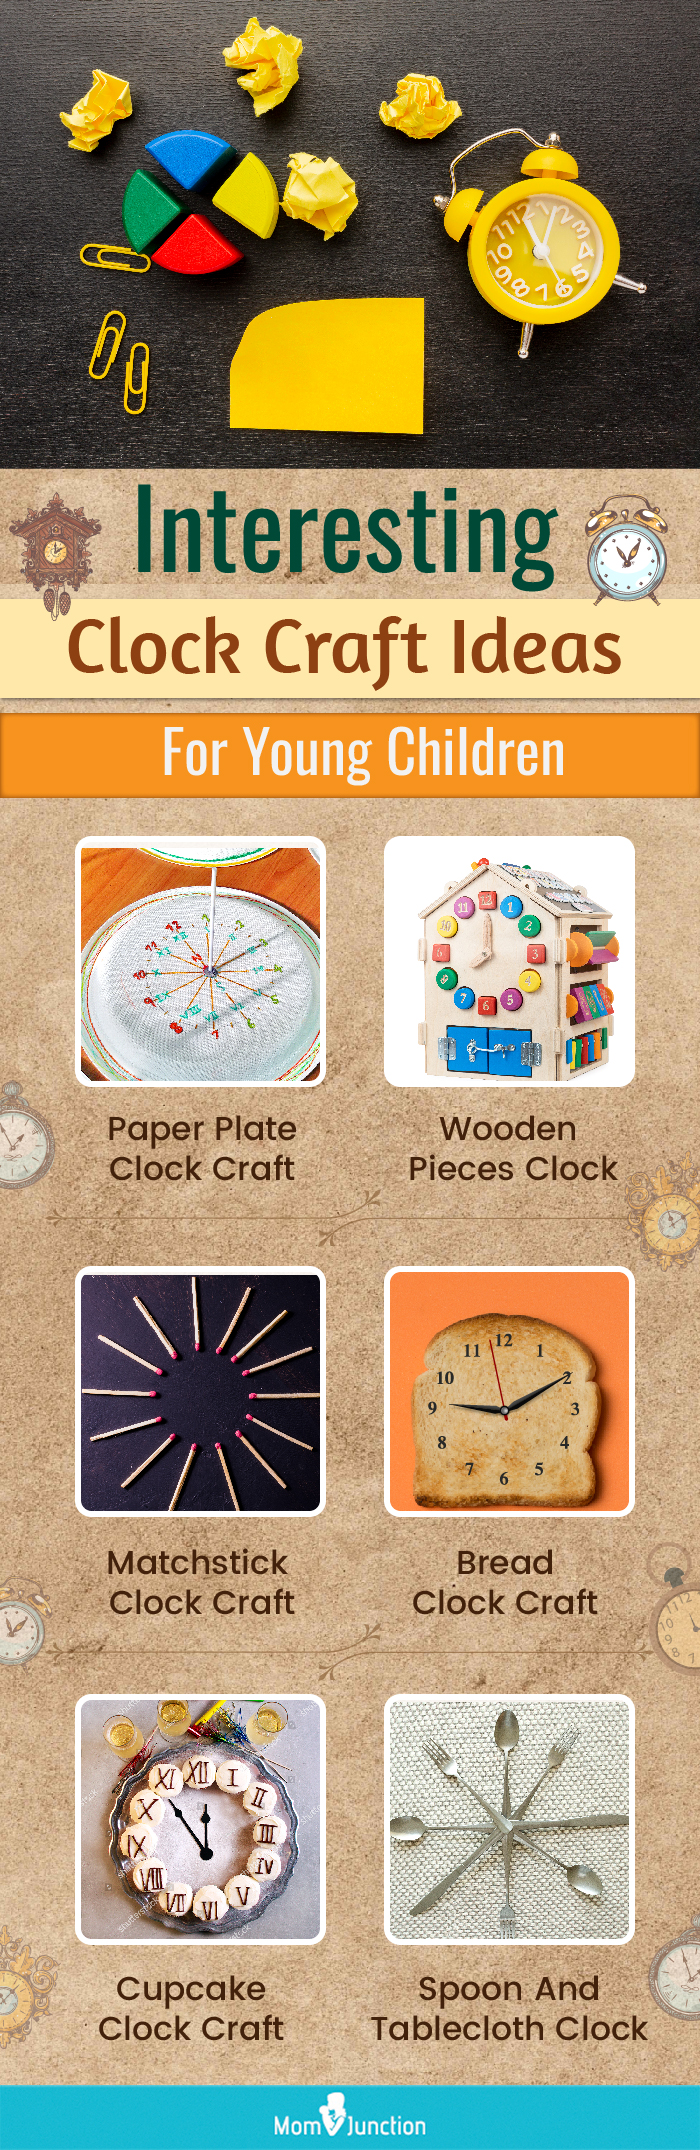 interesting clock craft ideas for young children (infographic)